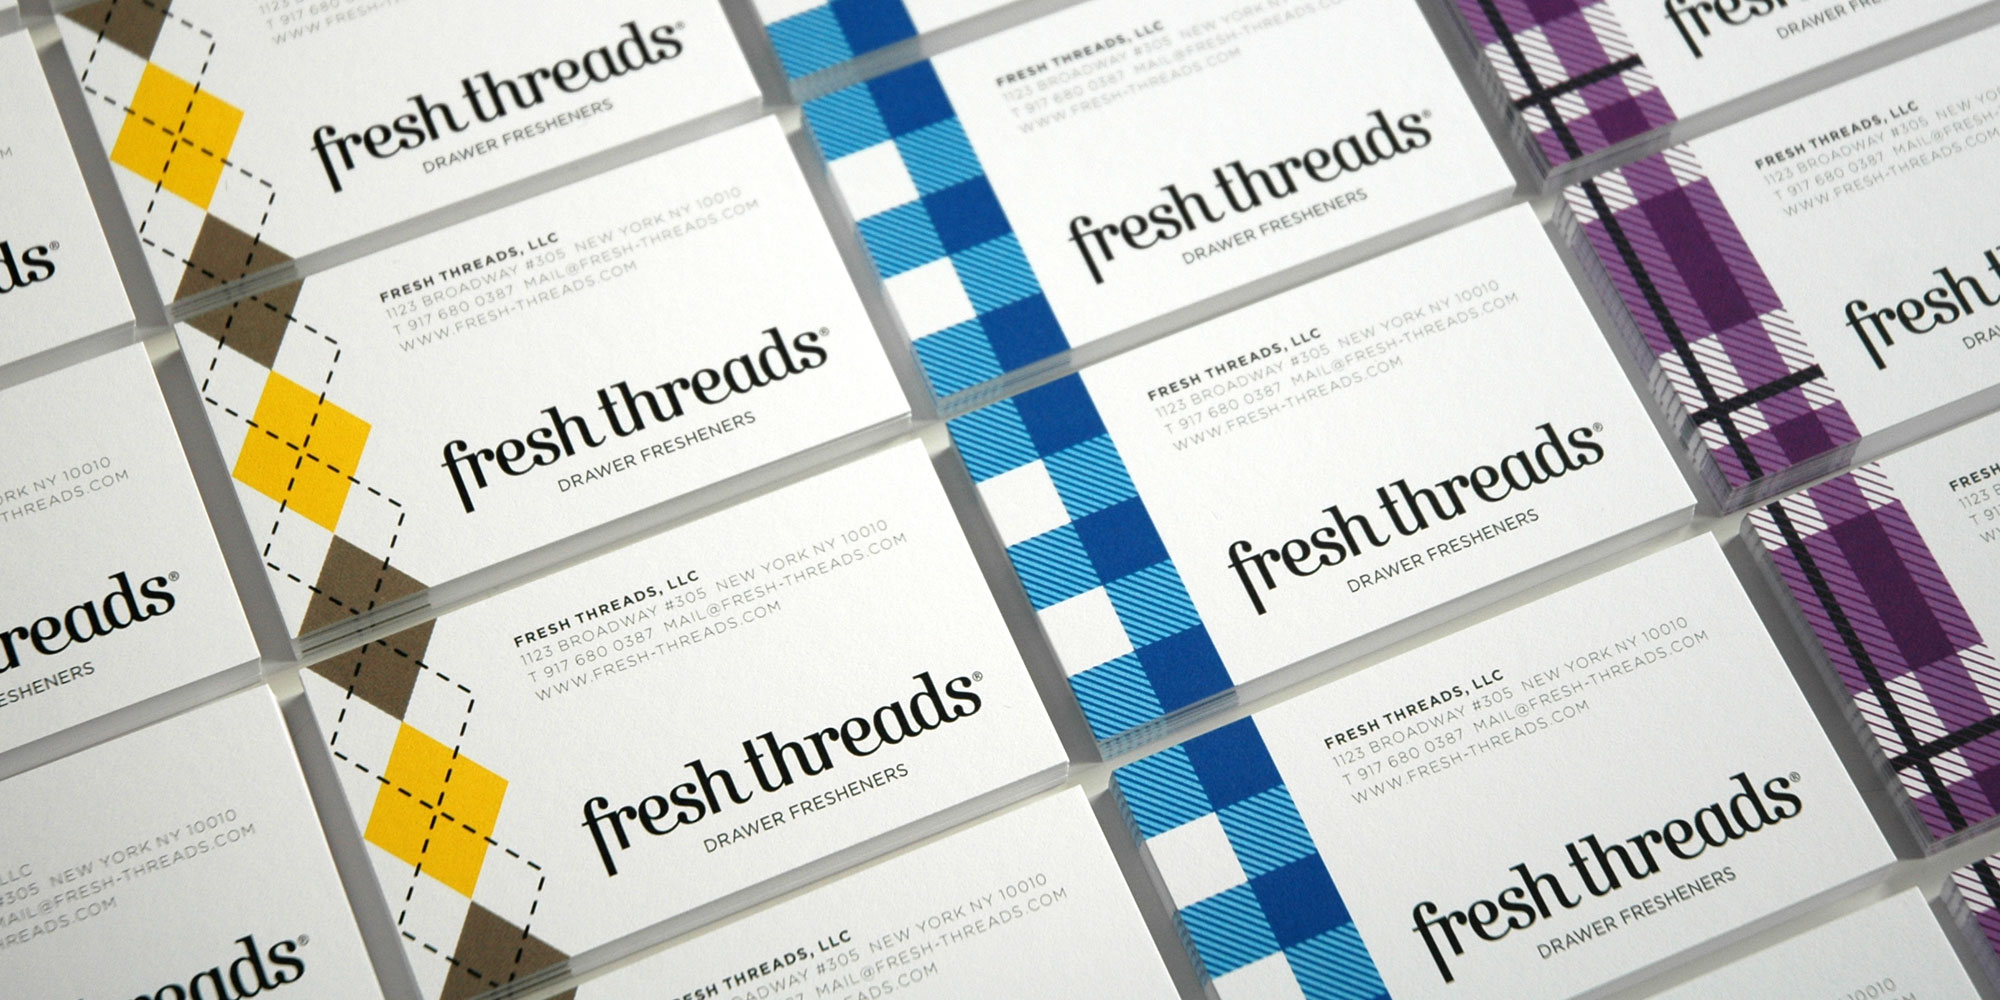 Fresh Threads Business Cards